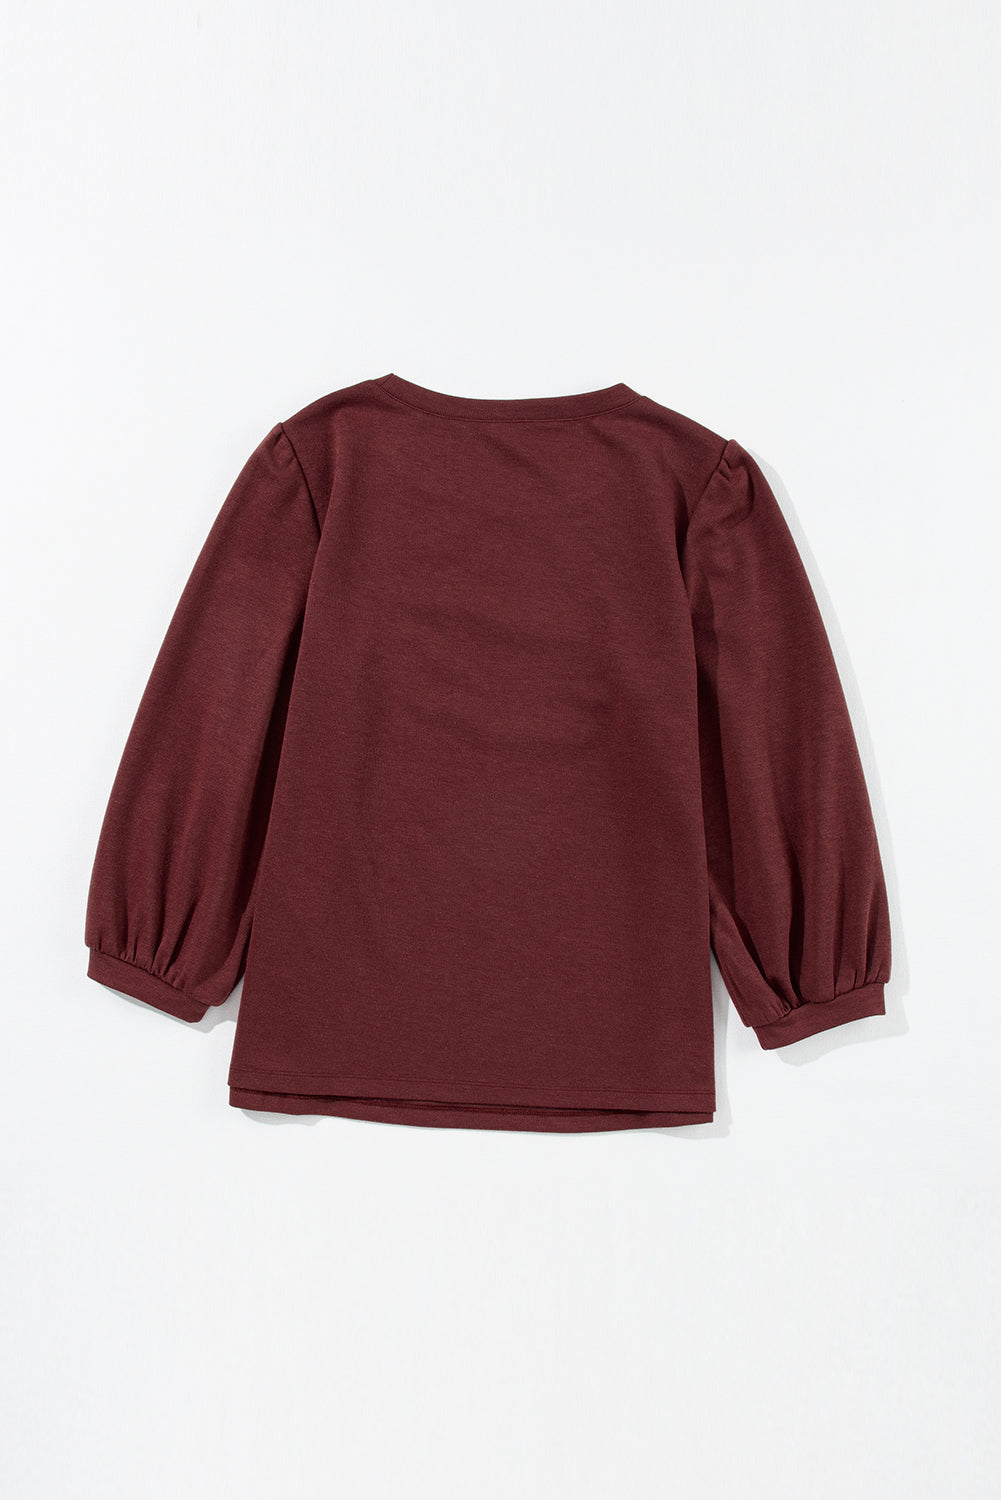 Red Dahlia Solid Color 3/4 Sleeve Round Neck Top